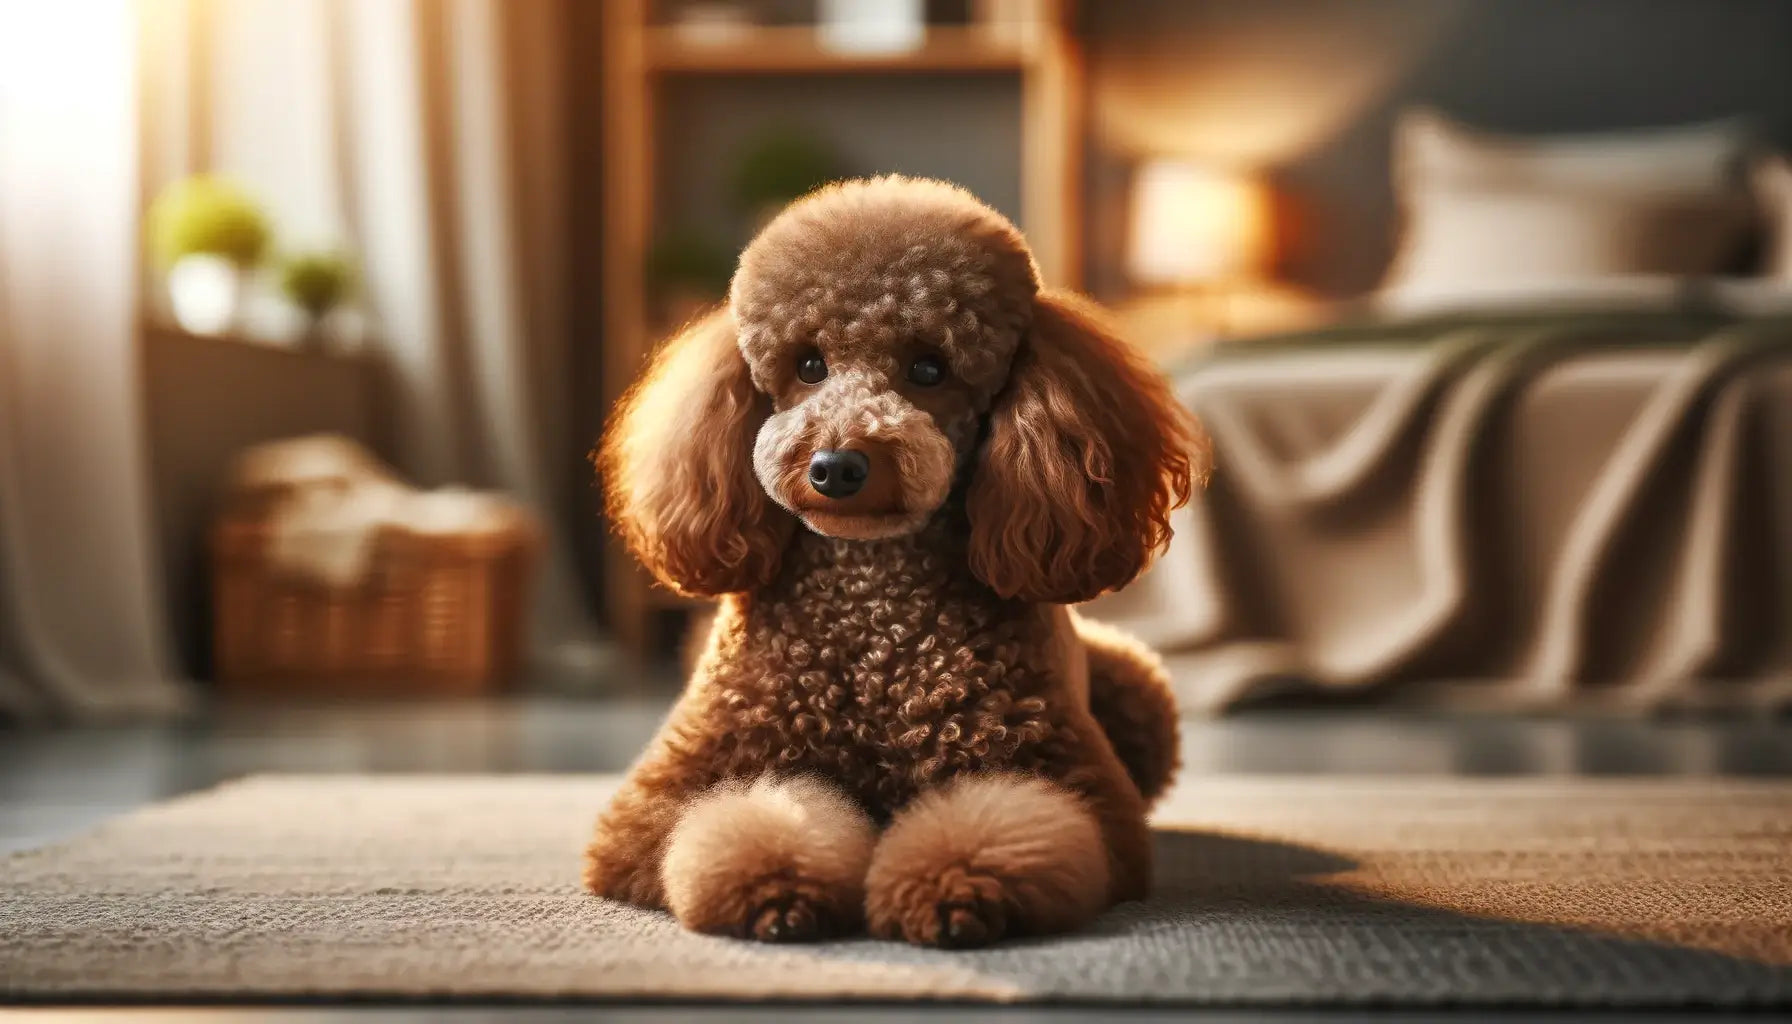 A brown Poodle lying down indoors, looking calm and relaxed.